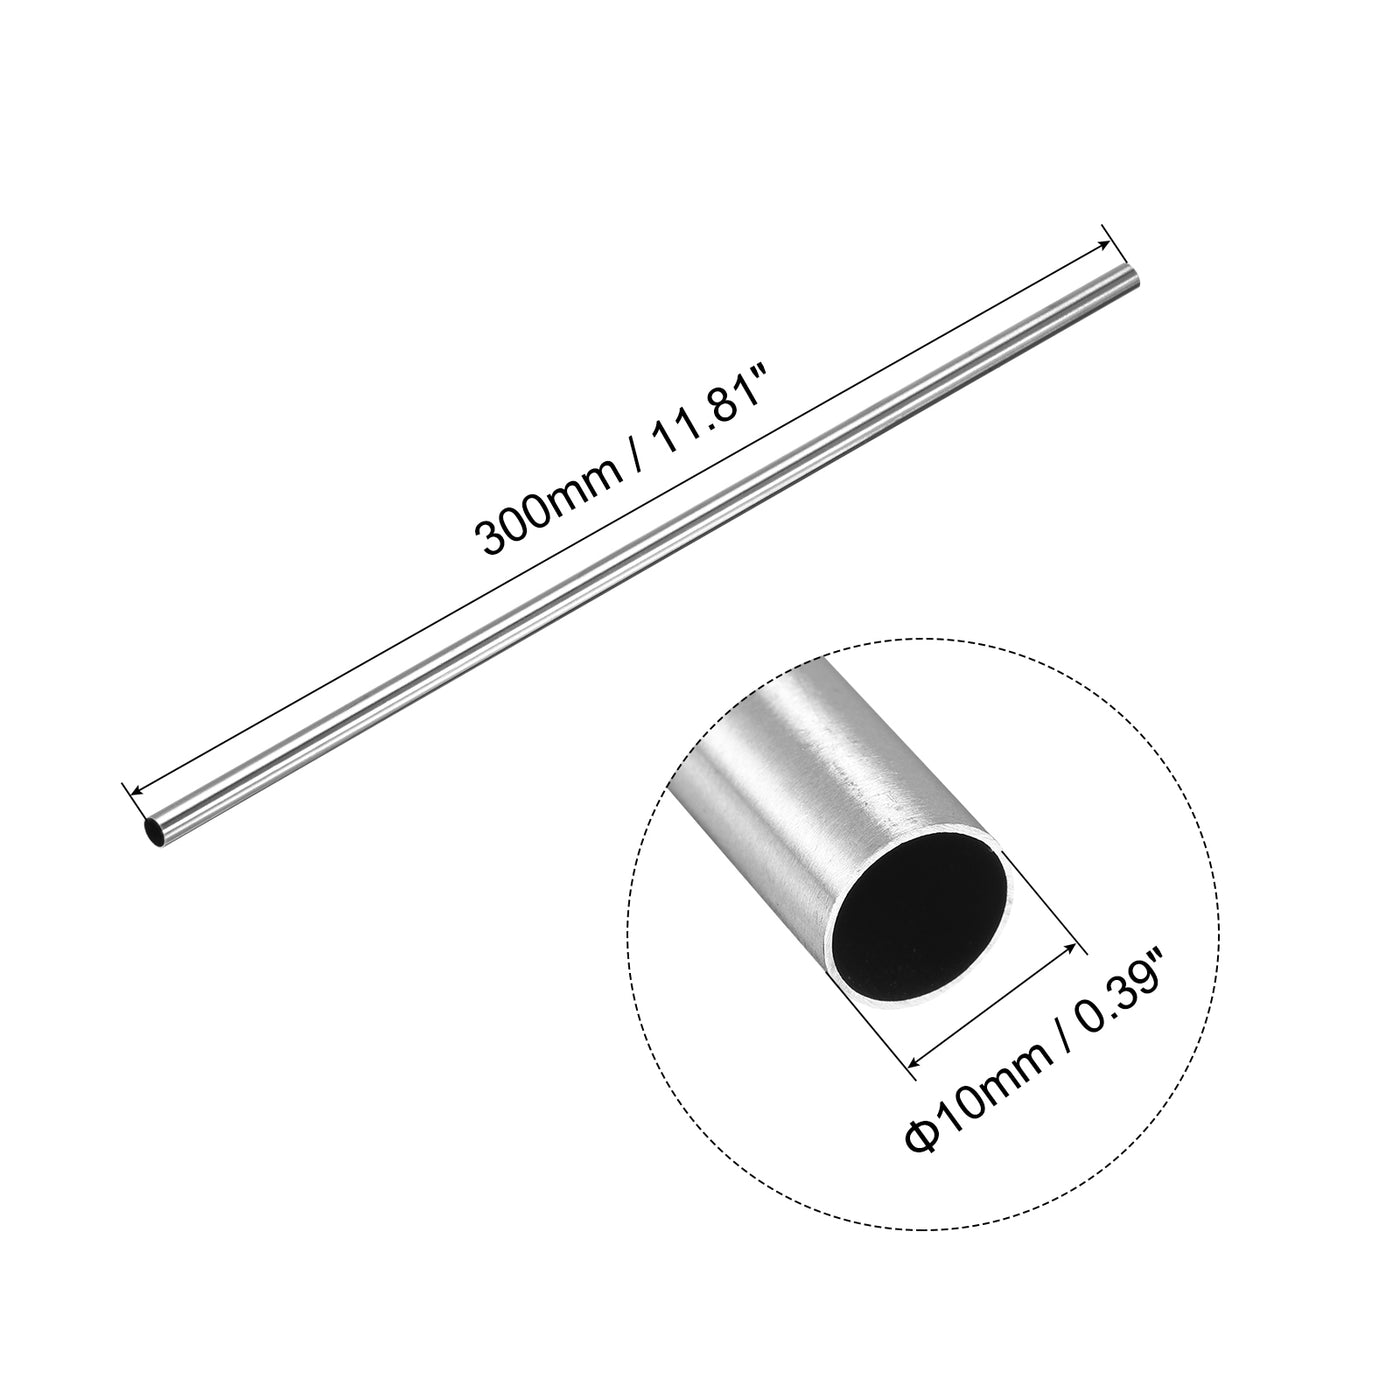 uxcell Uxcell 304 Stainless Steel Tubing Seamless Straight Pipe Tubes